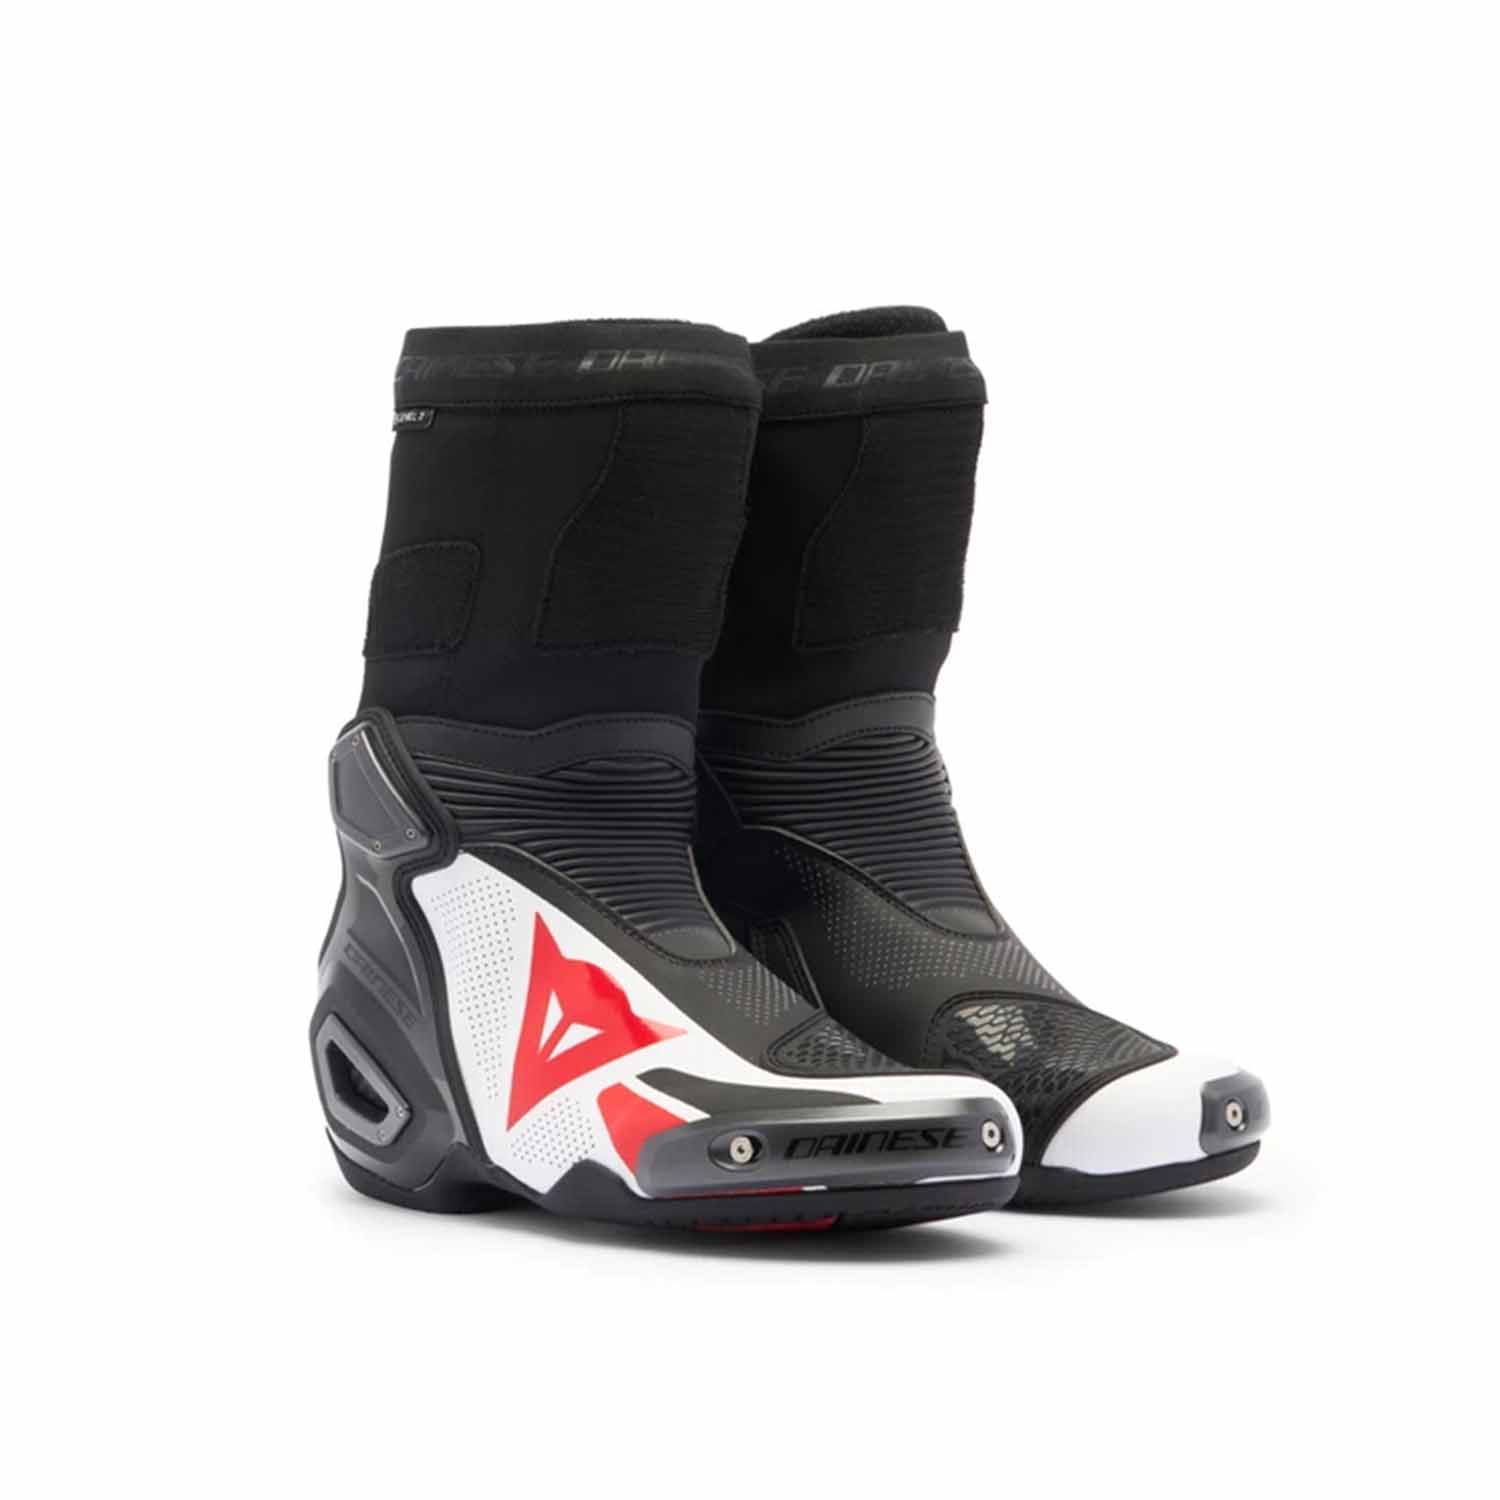 Image of Dainese Axial 2 Air Boots Black White Lava Red Size 41 EN